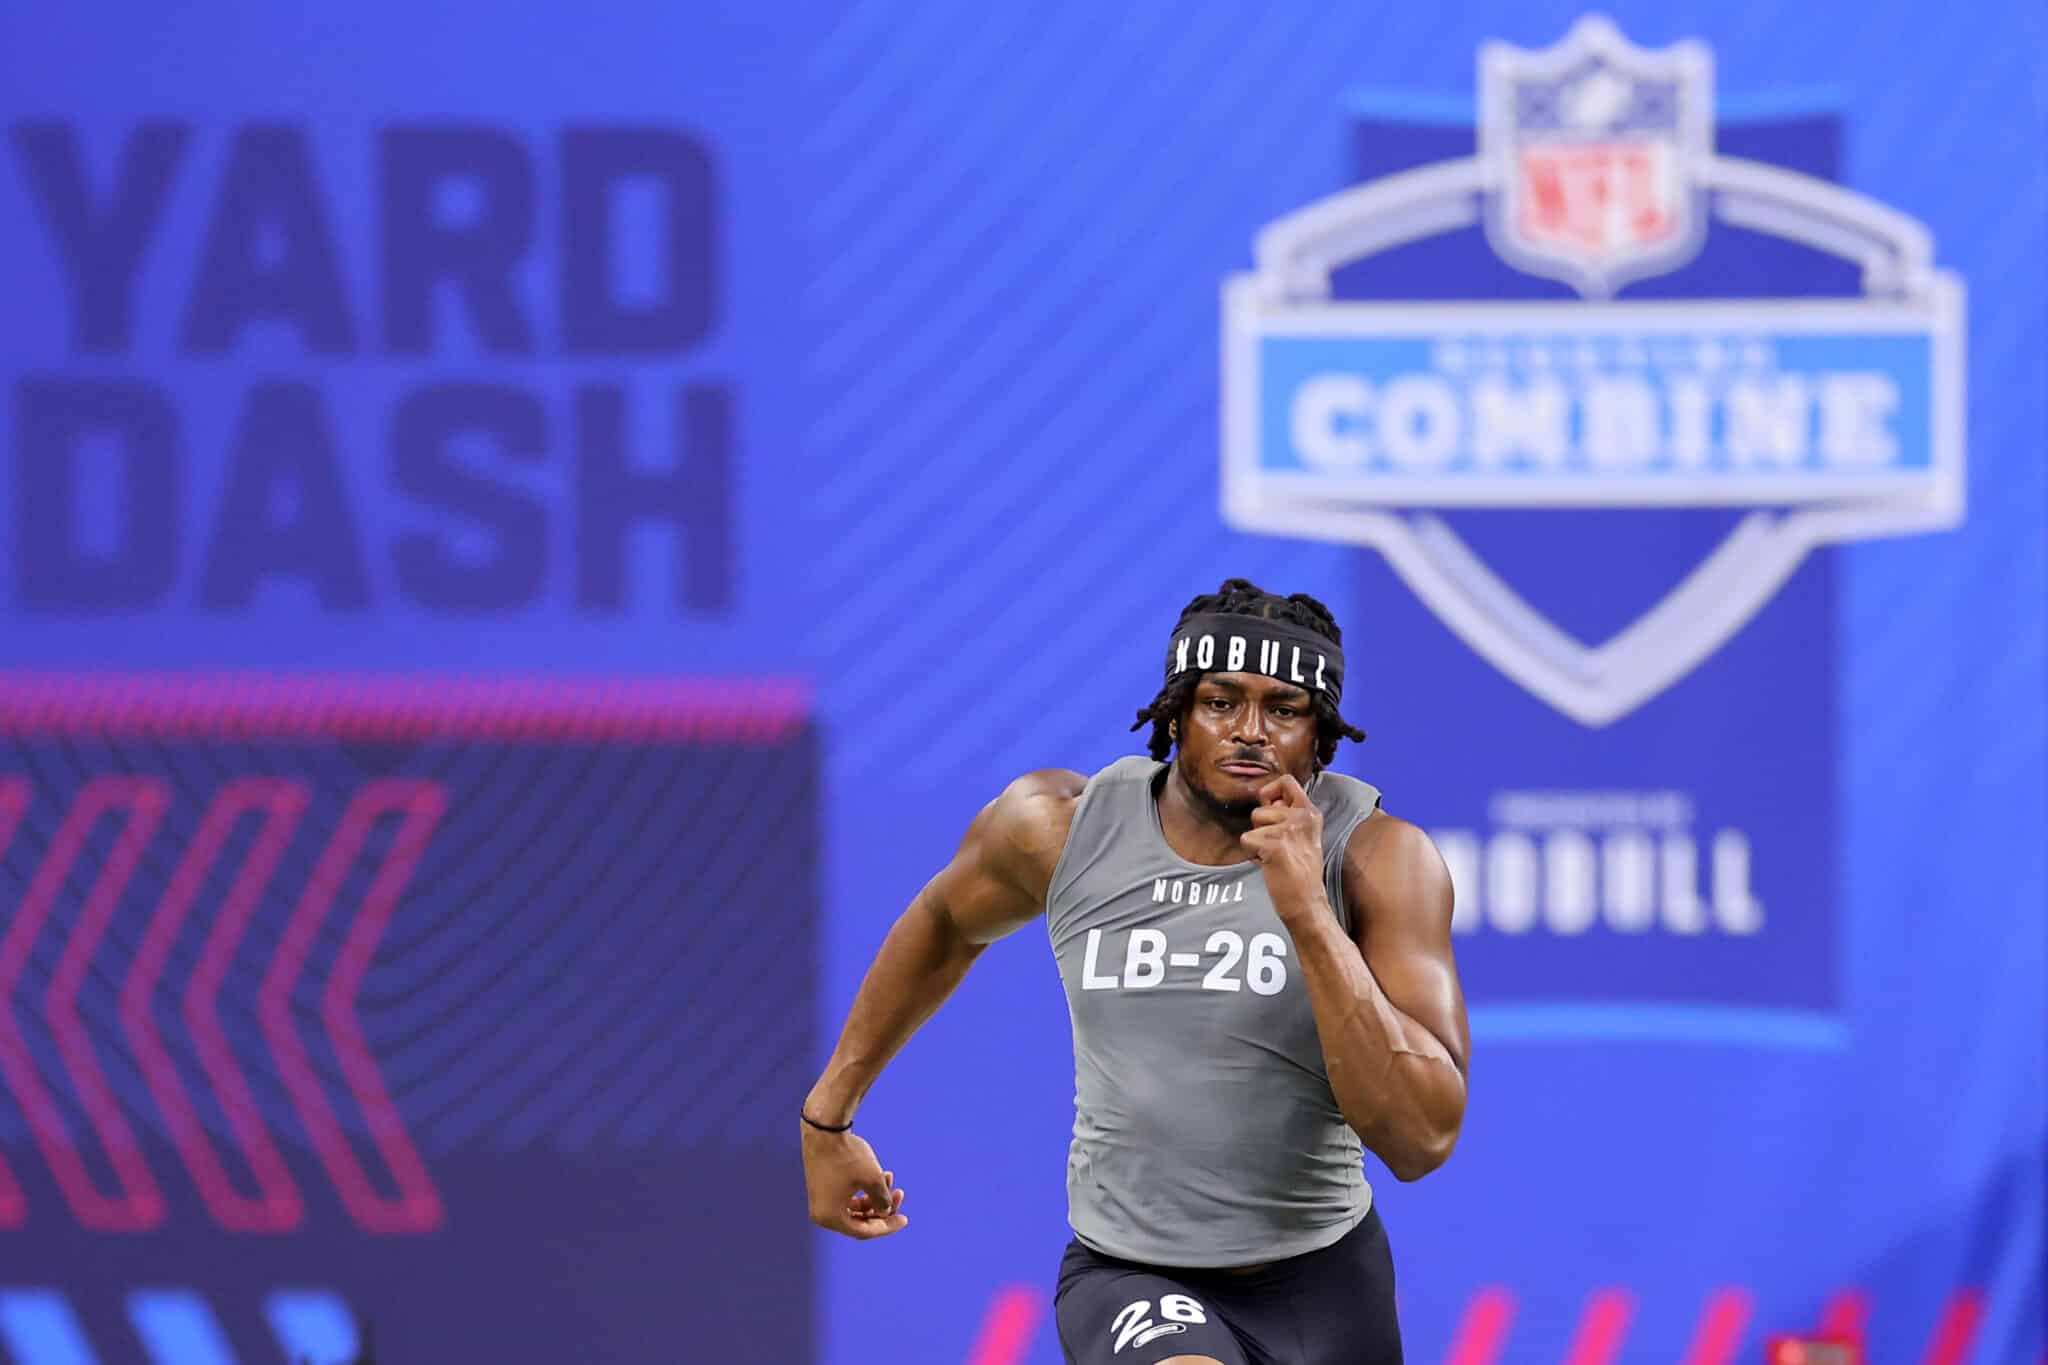 Dallas Turner #LB26 of Alabama participates in the 40-yard dash during the NFL Combine.